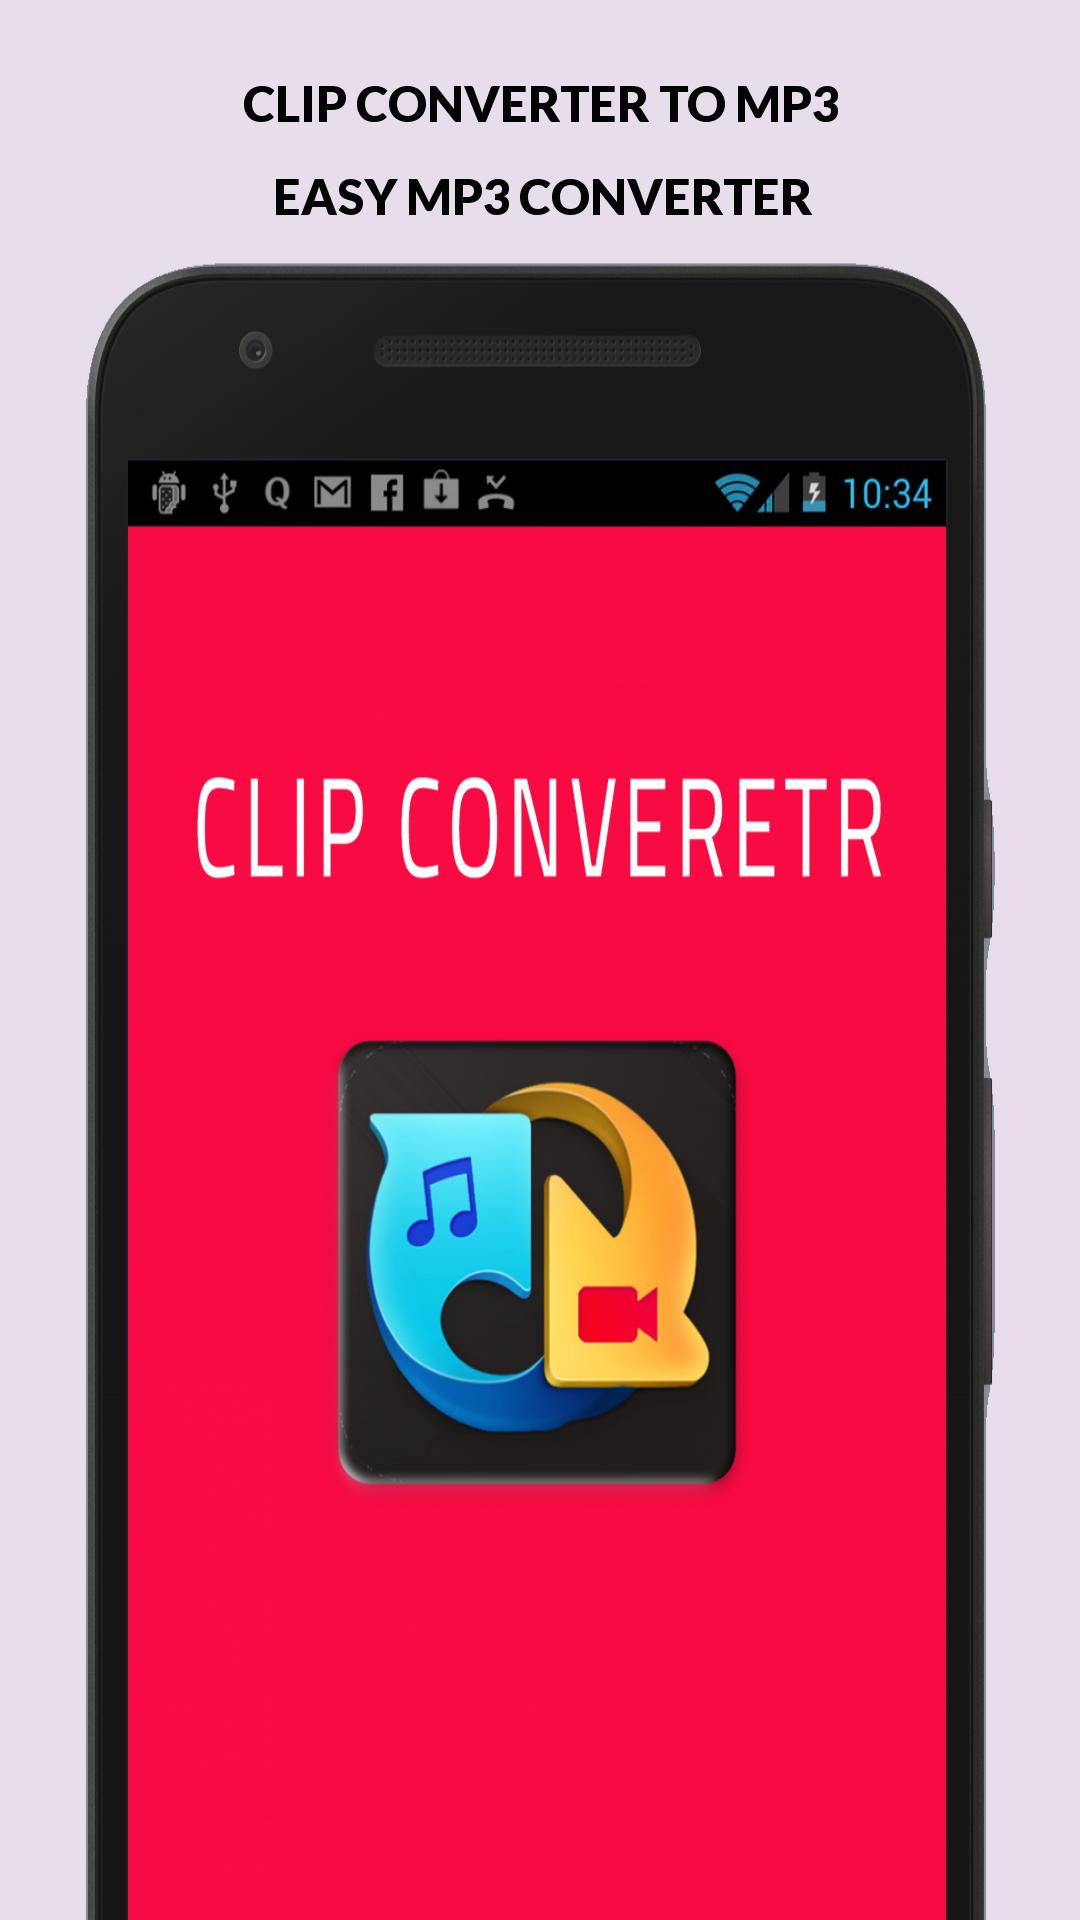 Clip converter to MP3 for Android - APK Download